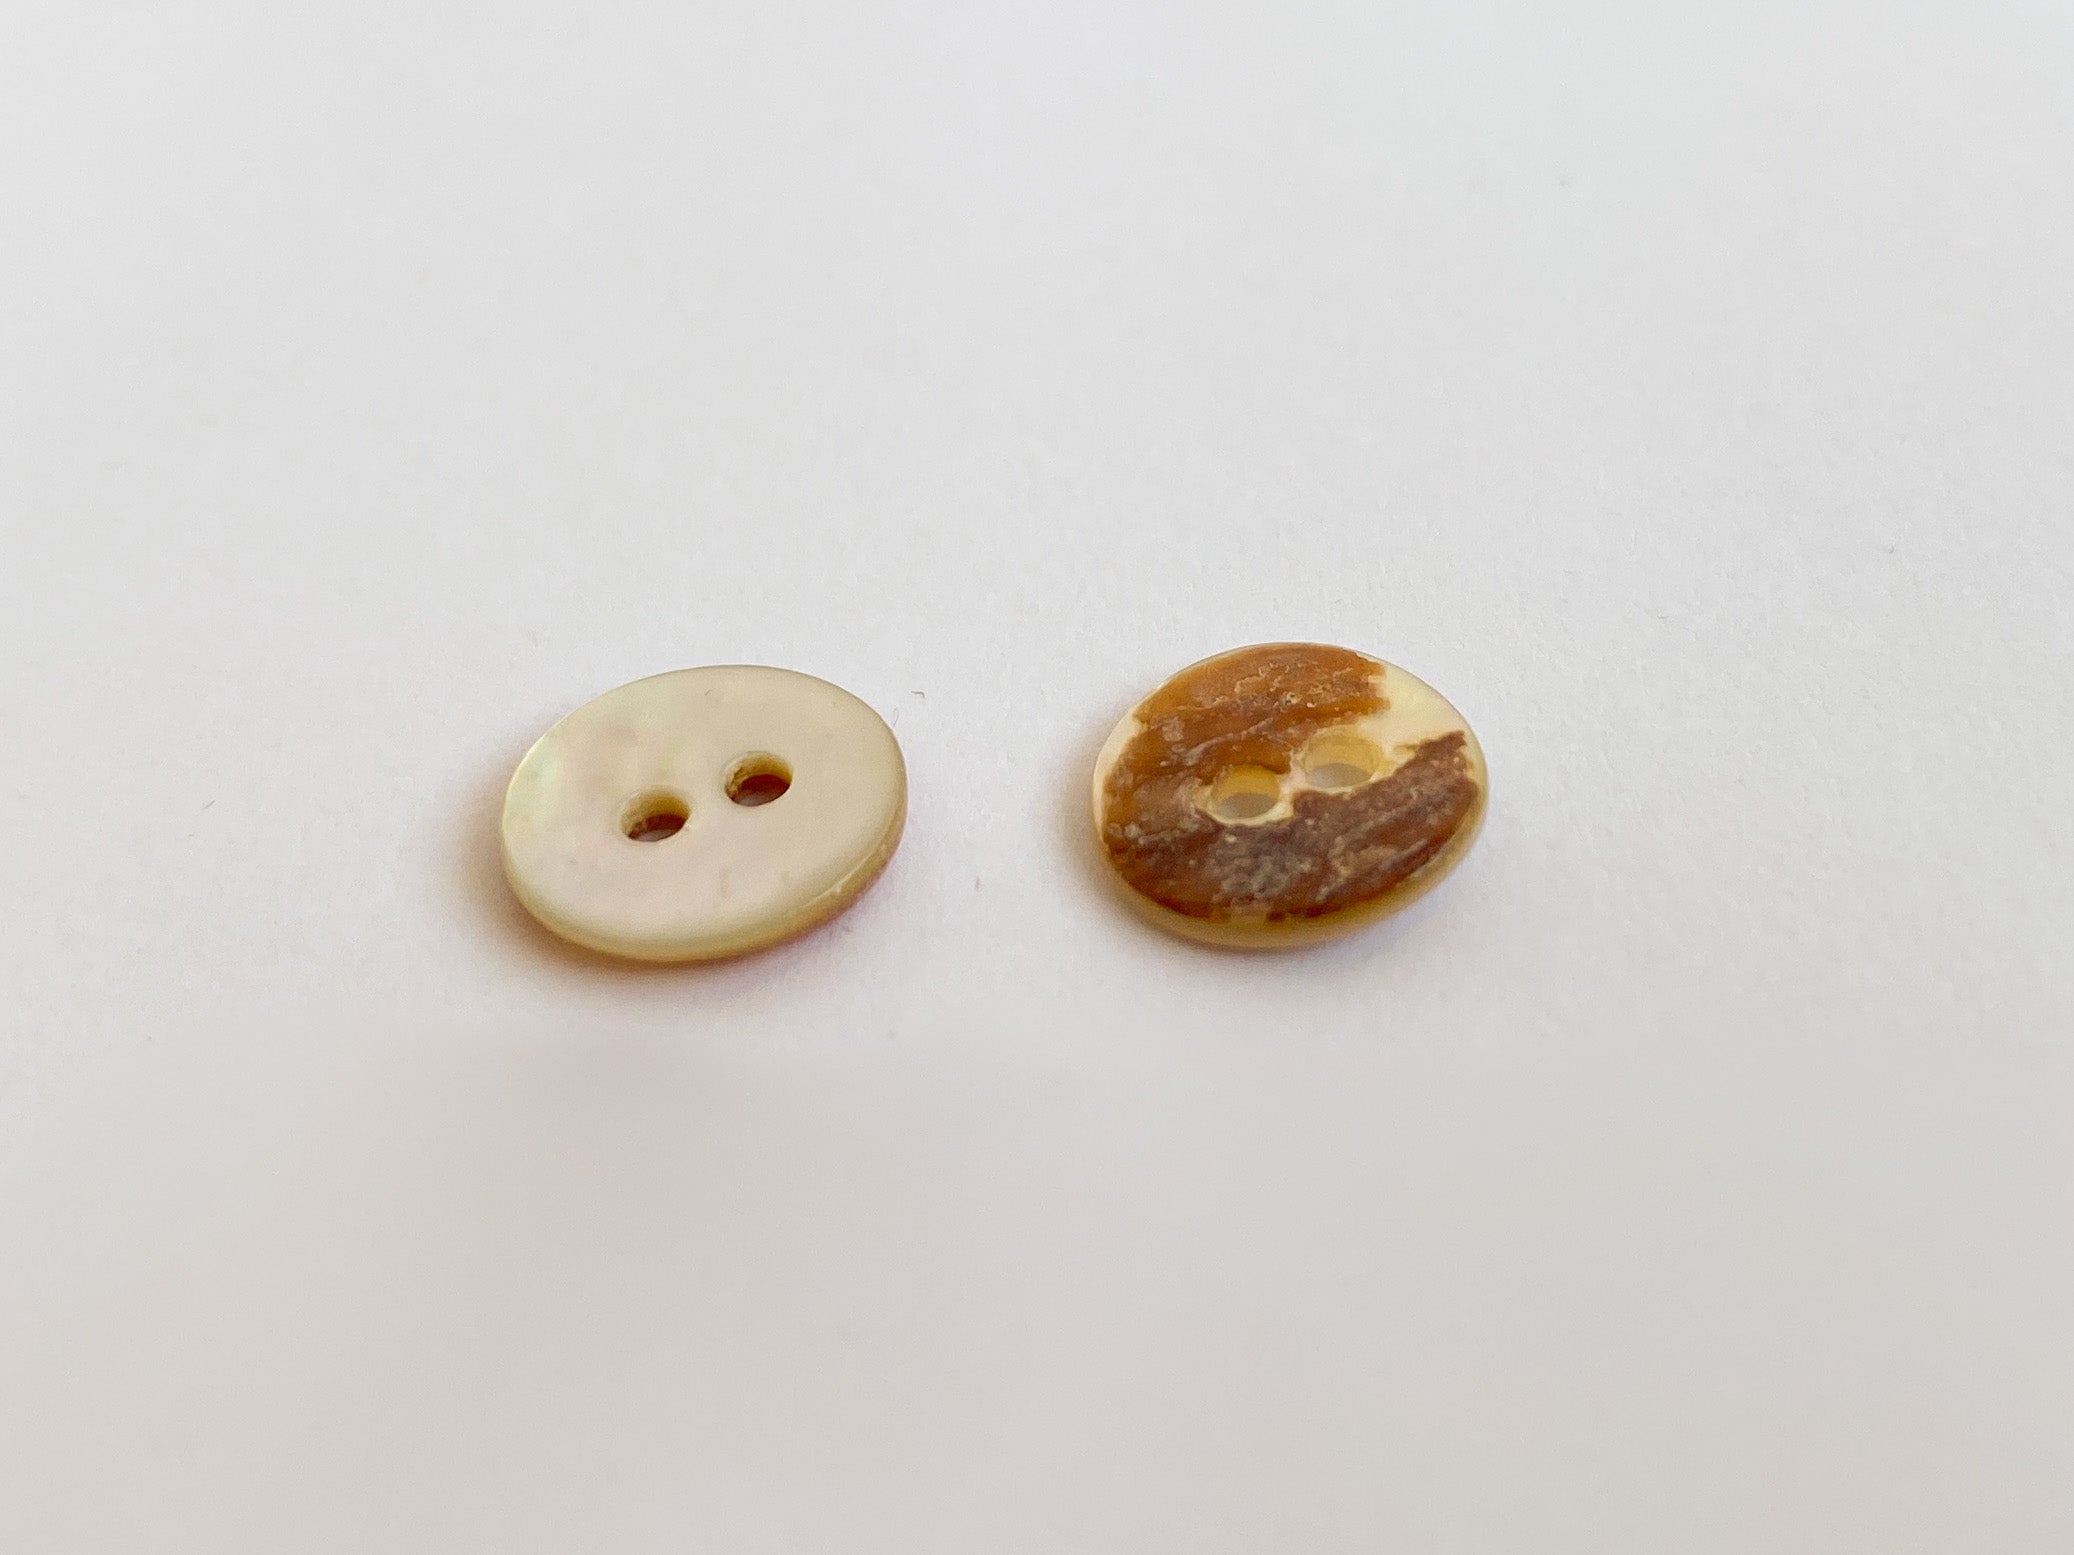 Mother-of-pearl buttons 1.0 cm